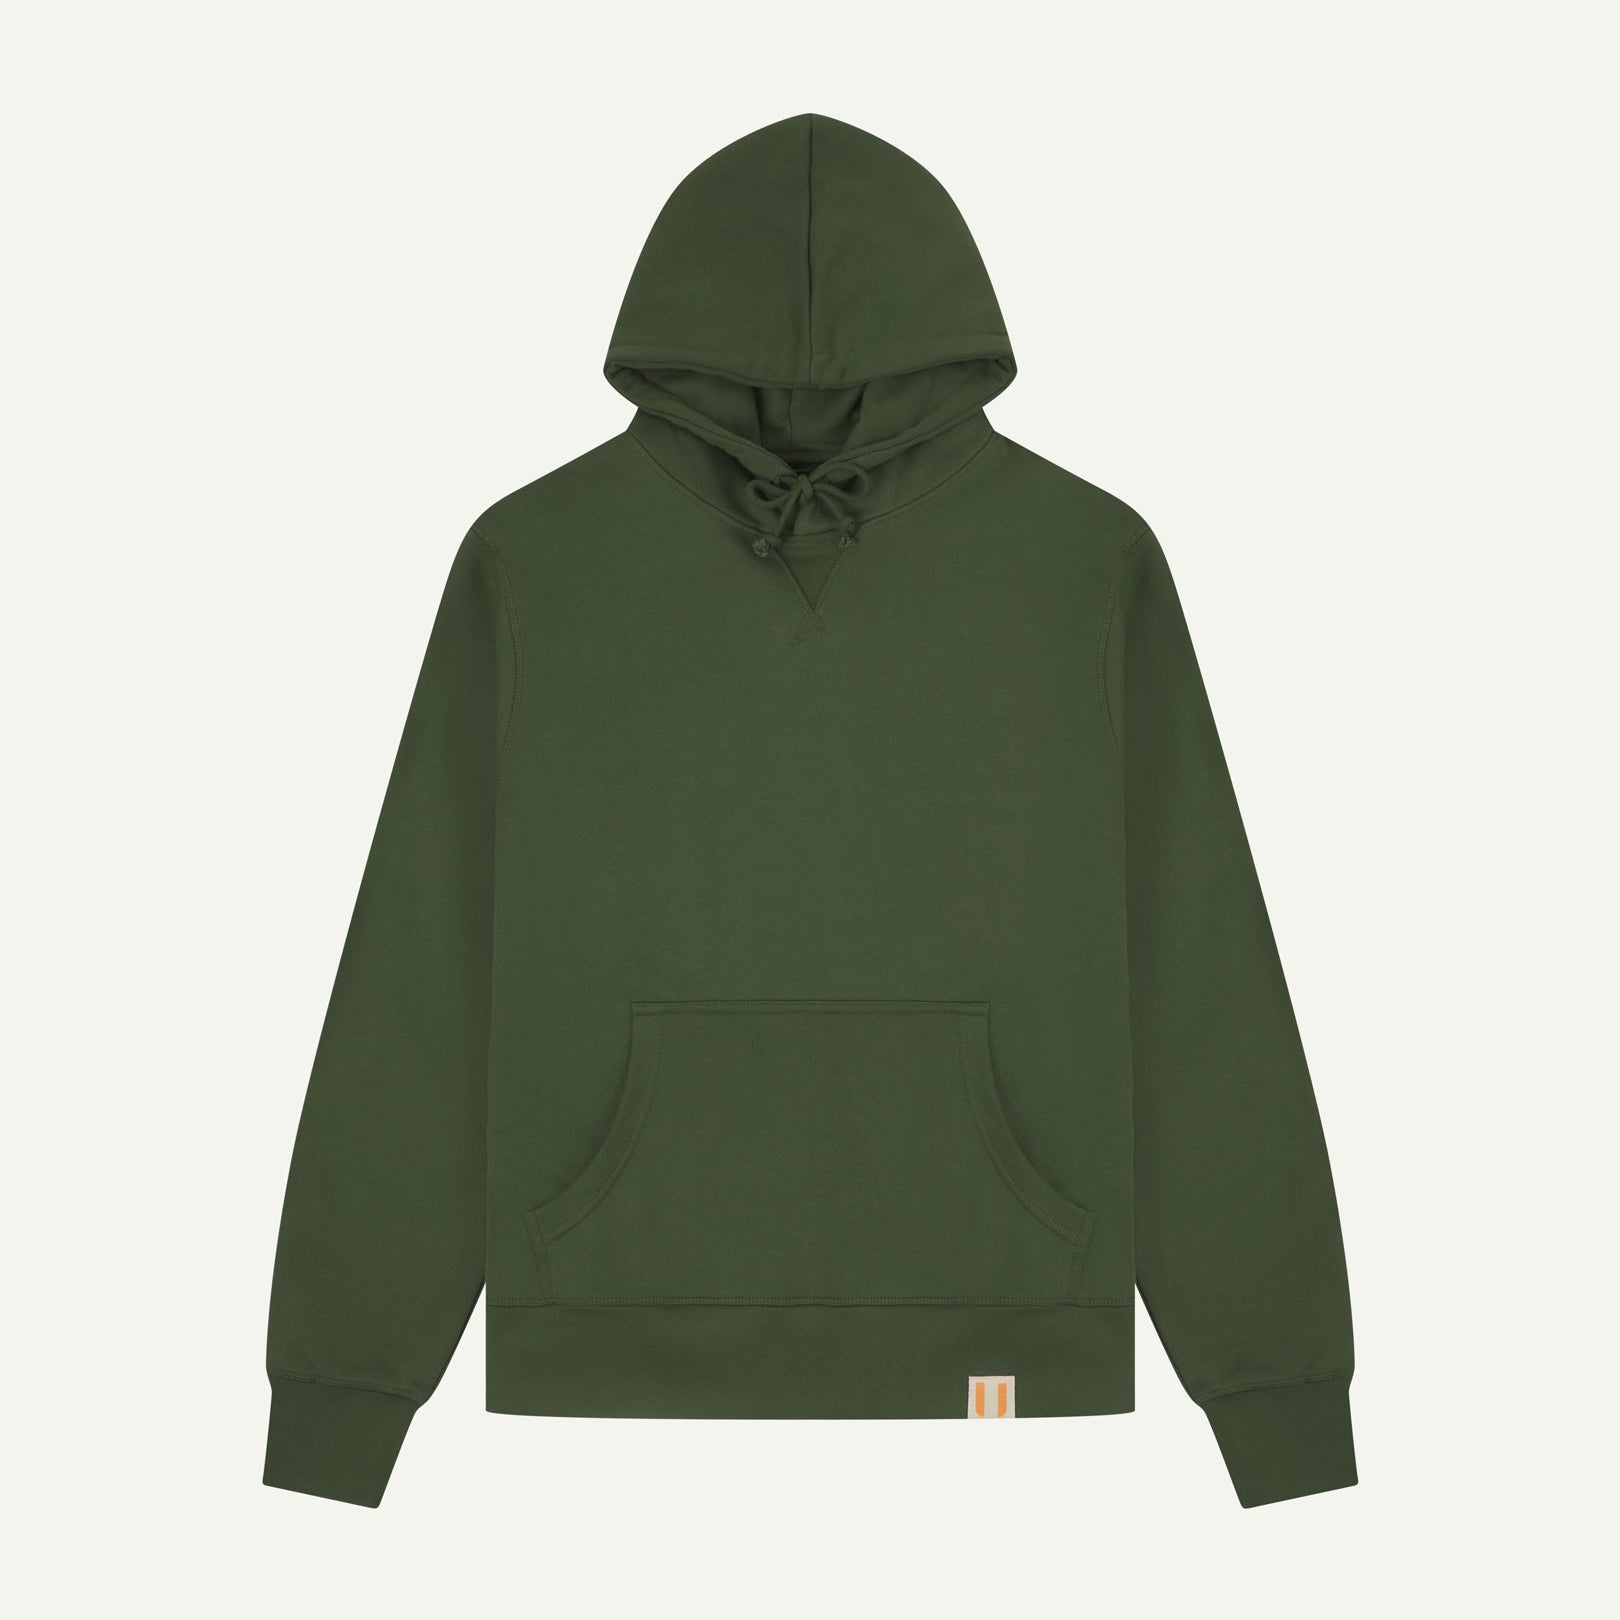 Front flat view of Uskees coriander-green hoodie showing brand logo and kangaroo front pocket.